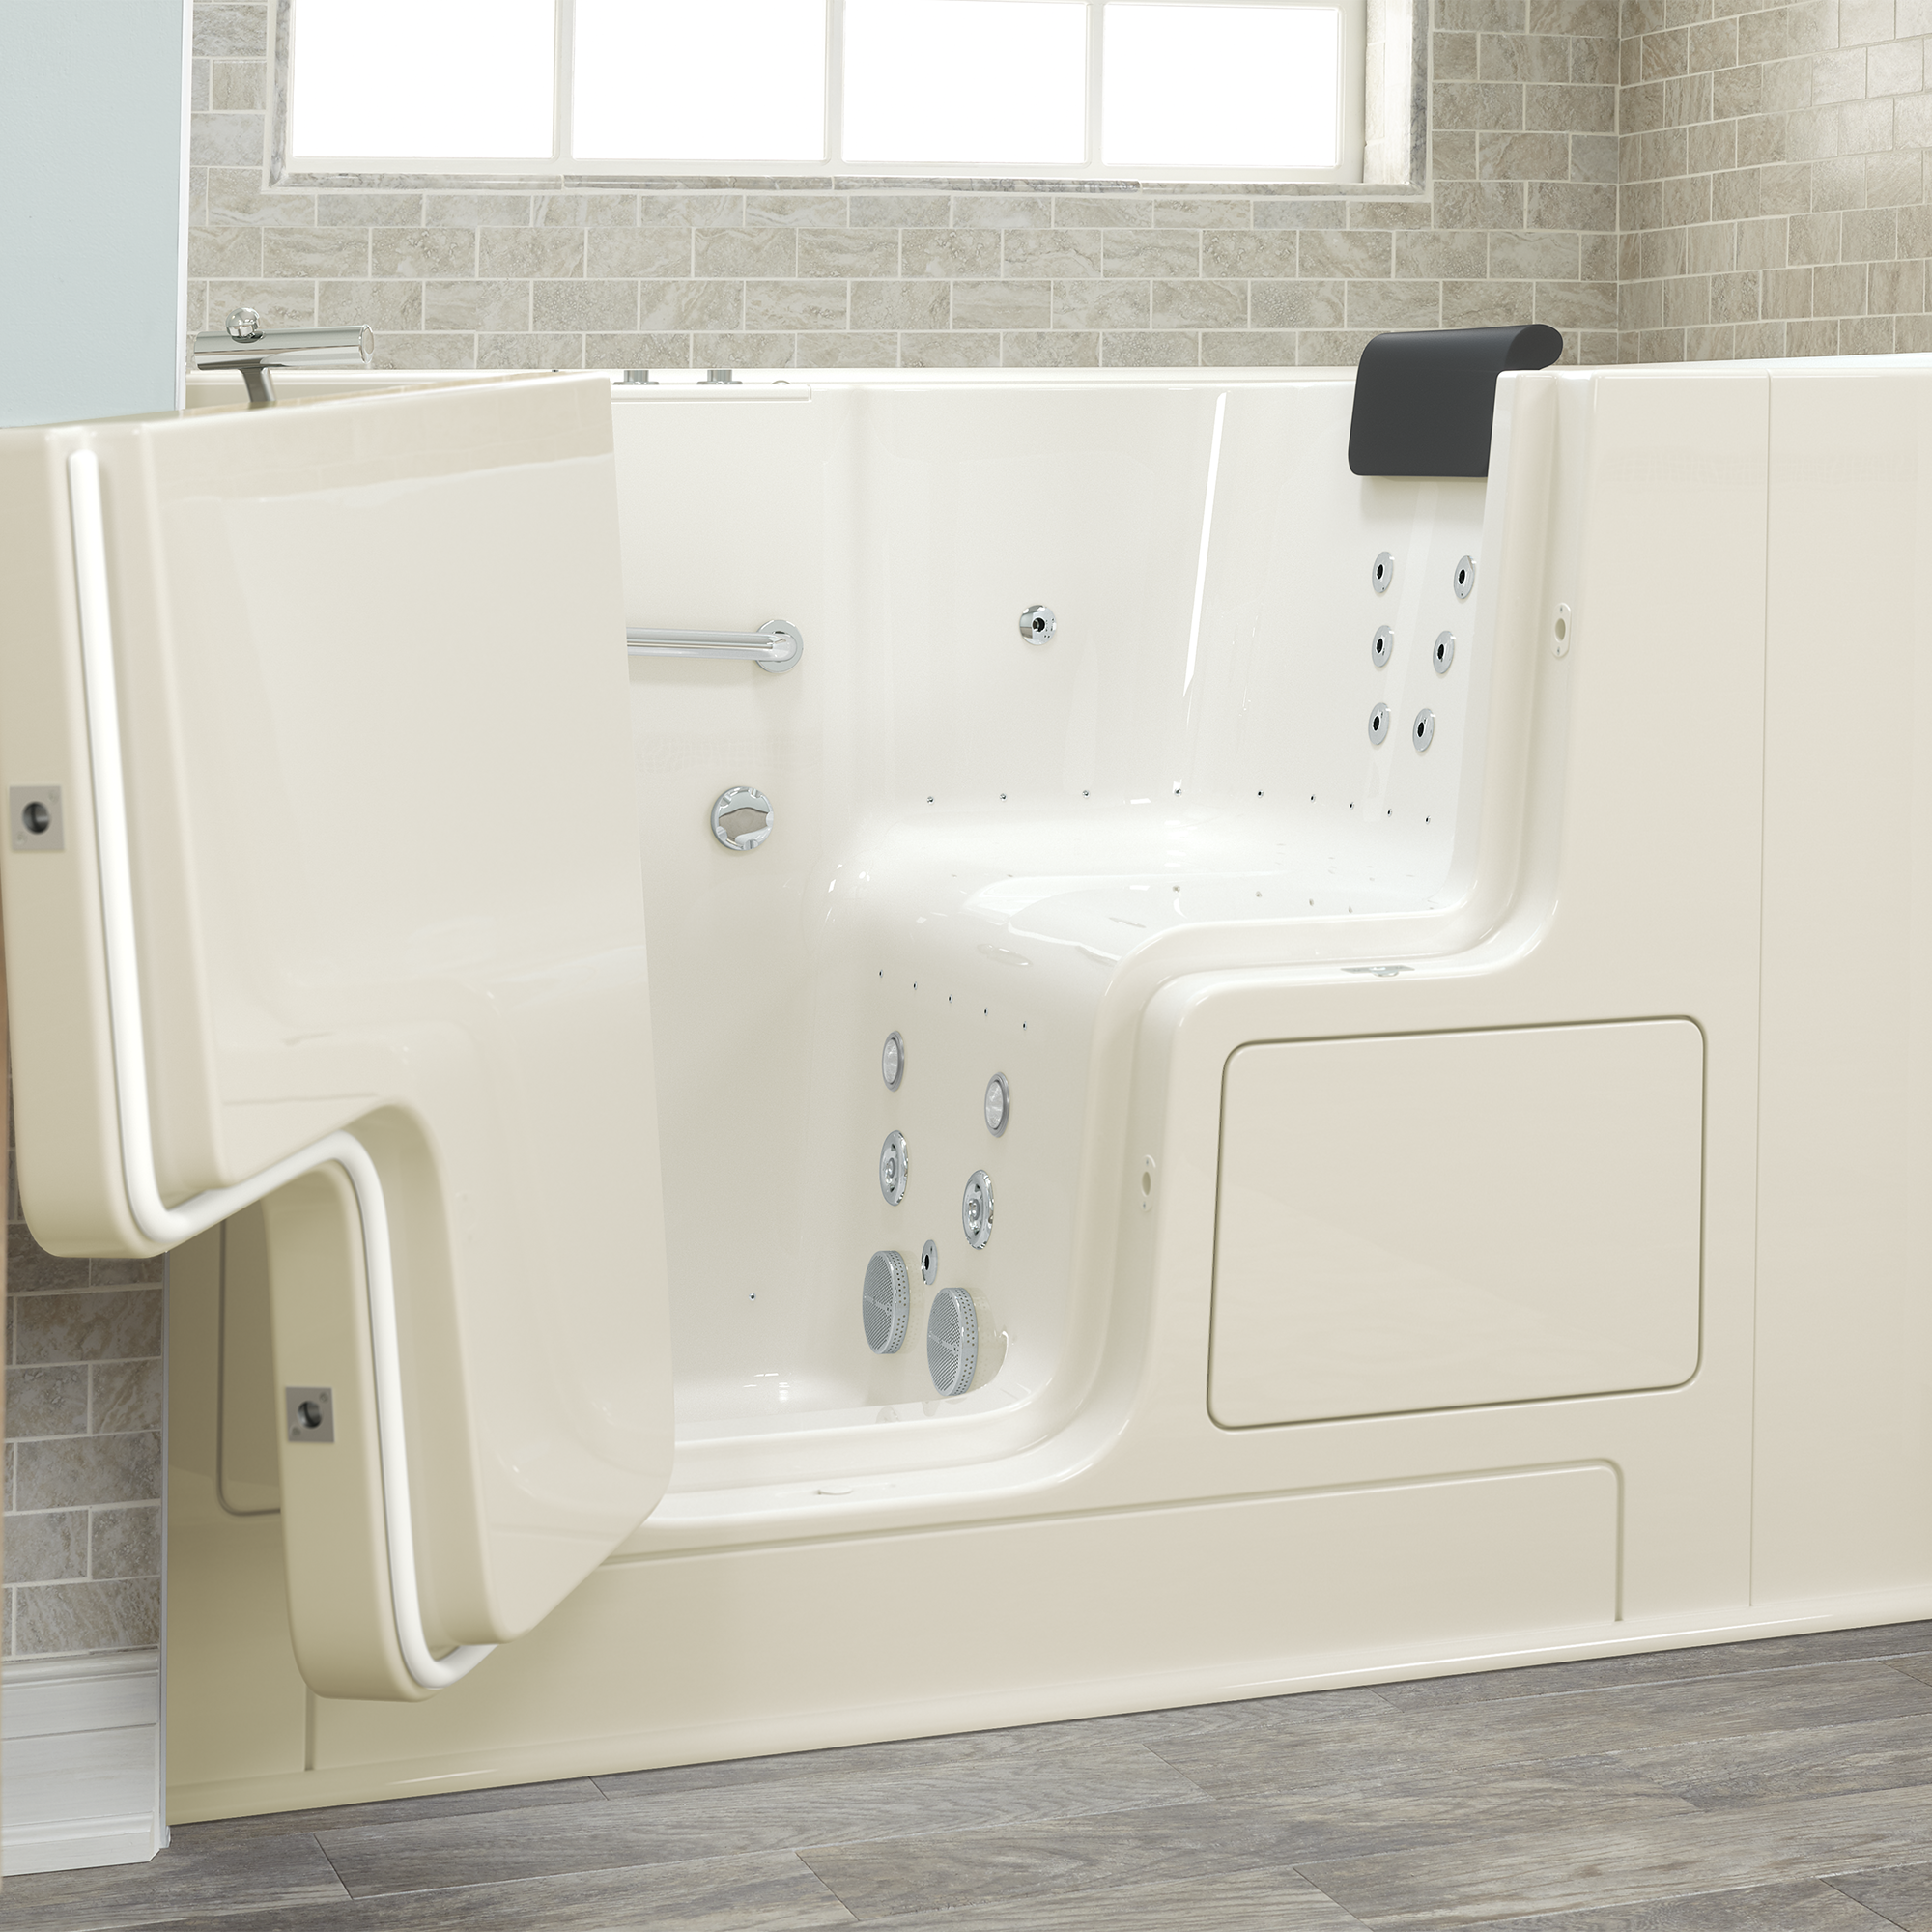 Gelcoat Premium Series 32 x 52  Inch Walk in Tub With Combination Air Spa and Whirlpool Systems   Left Hand Drain WIB LINEN